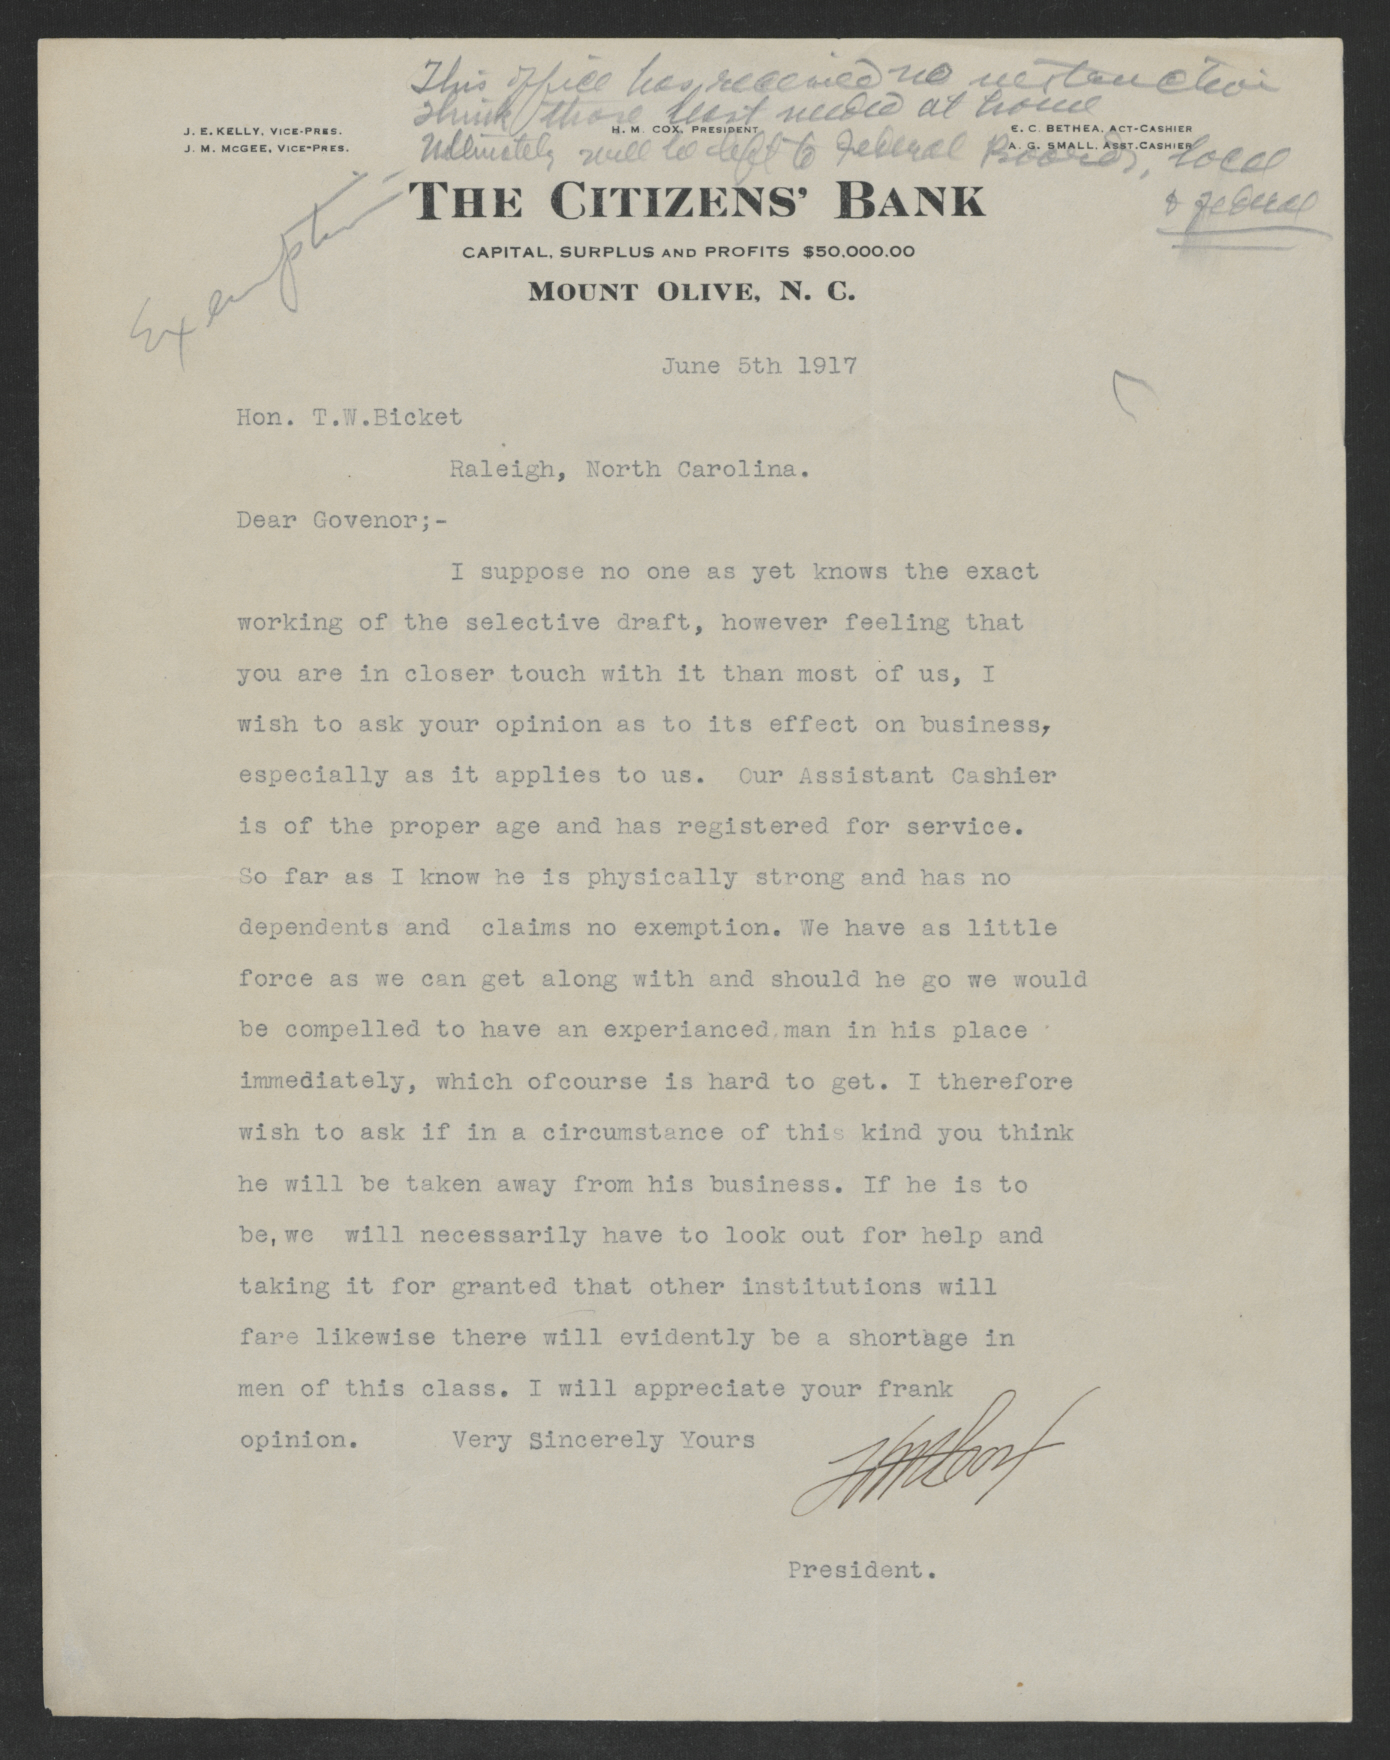 Letter from Headley M. Cox to Thomas W. Bickett, June 5, 1917